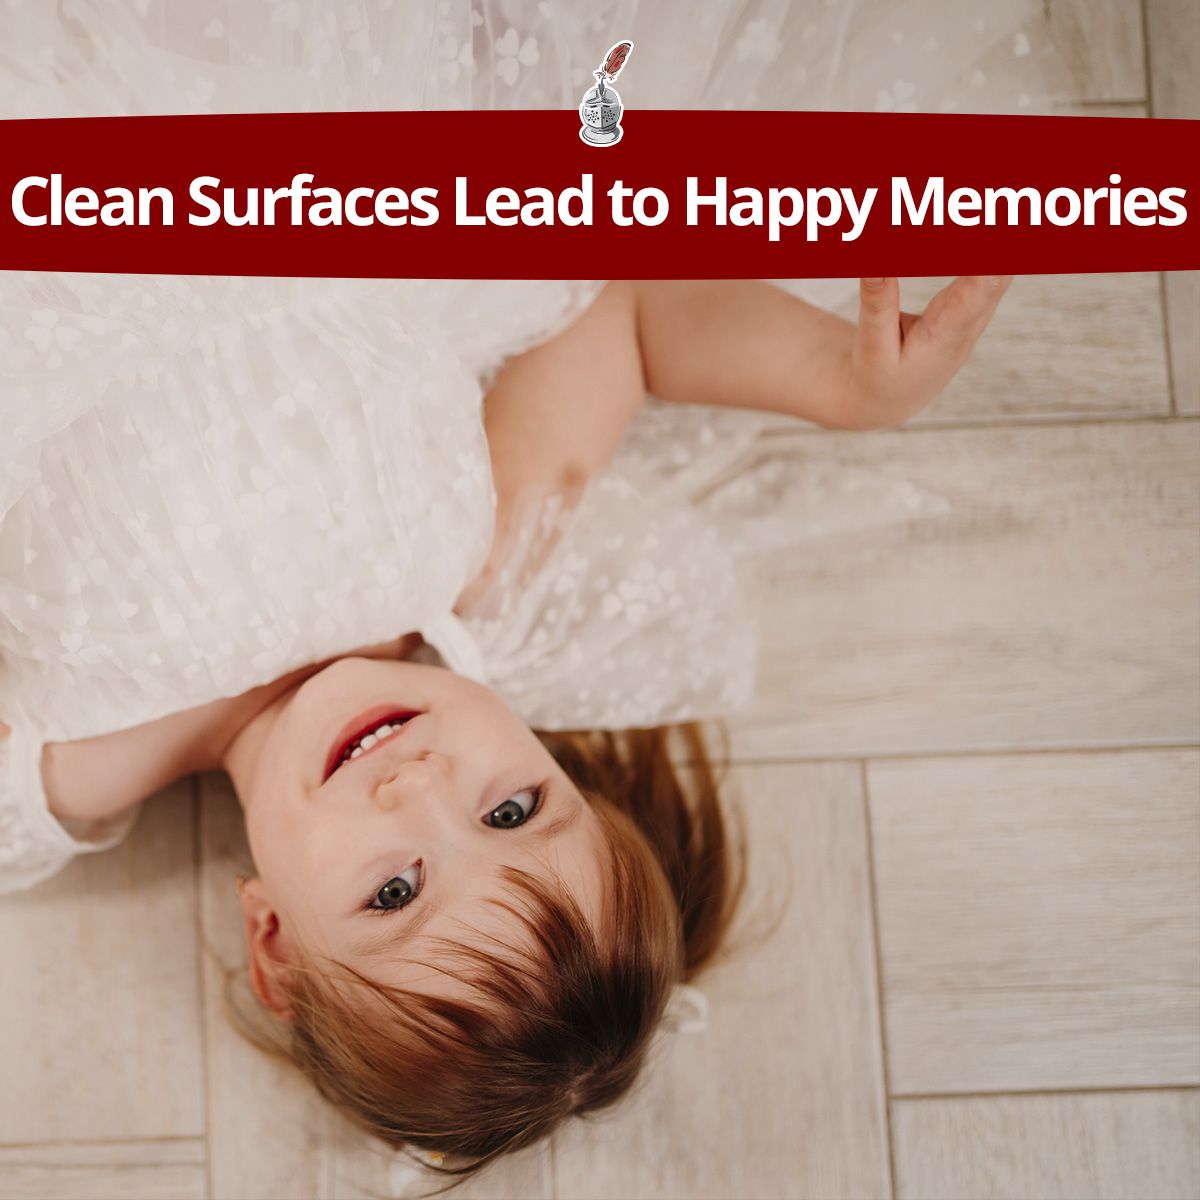 Clean Surfaces Lead to Happy Memories